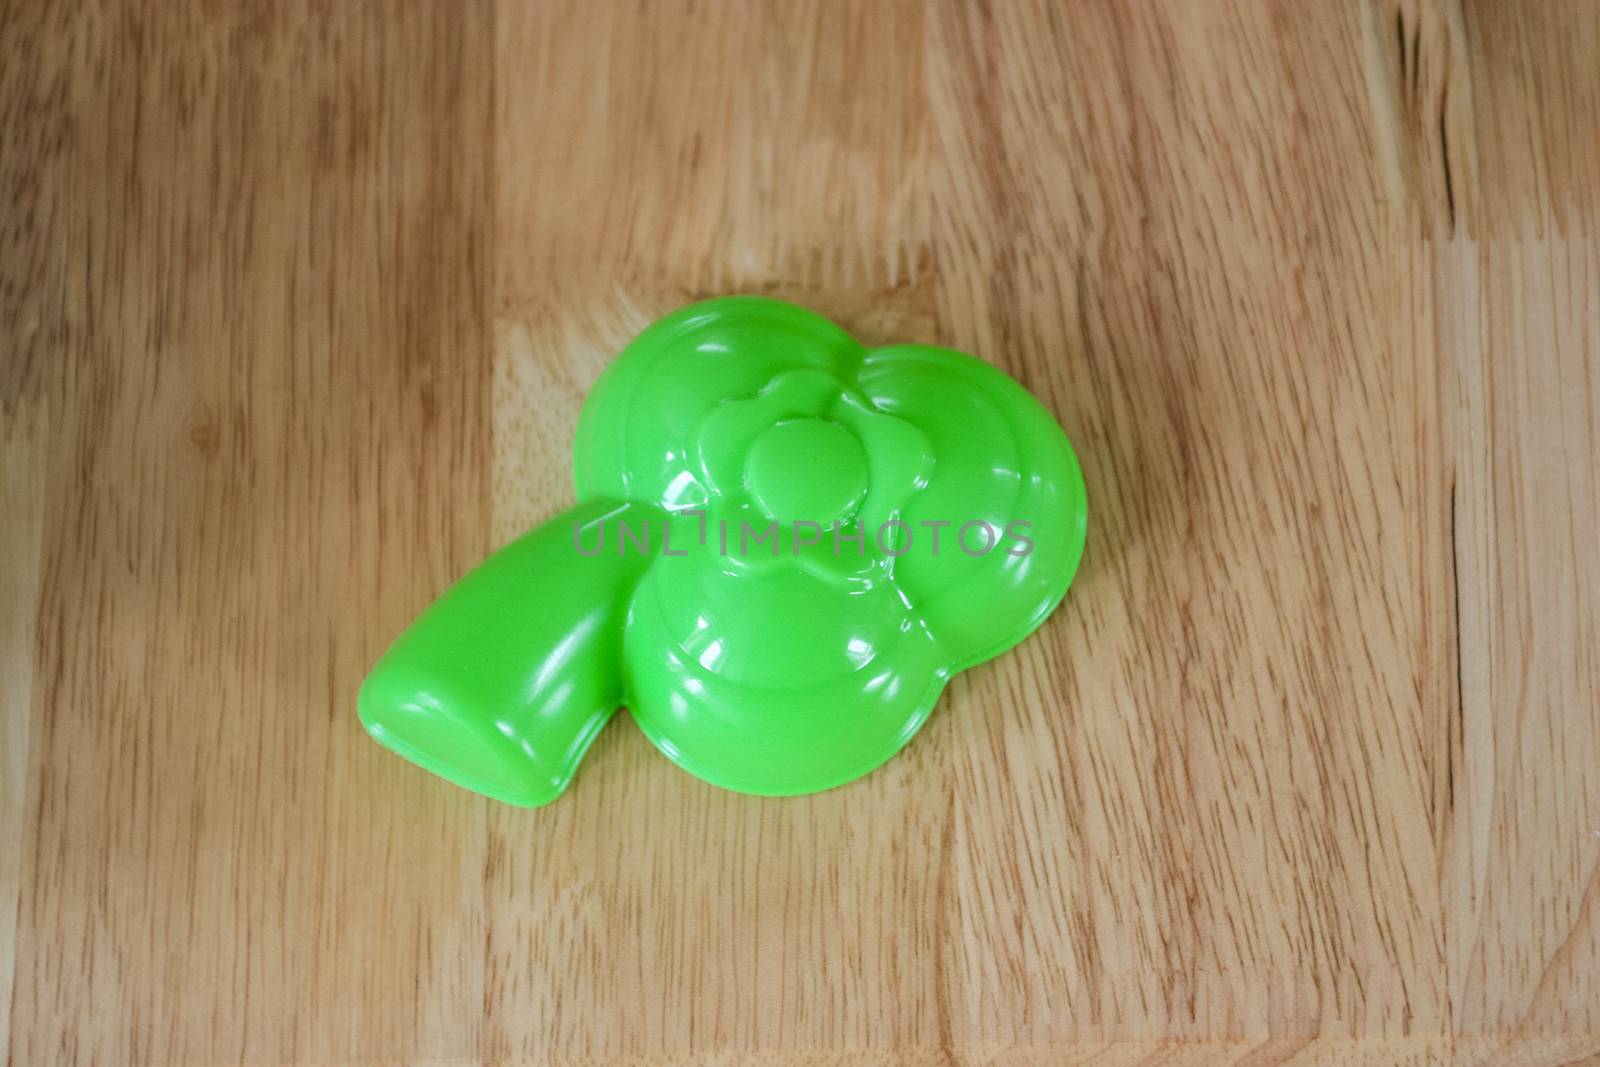 Green plastic beach toy in form of leaf on wooden background.